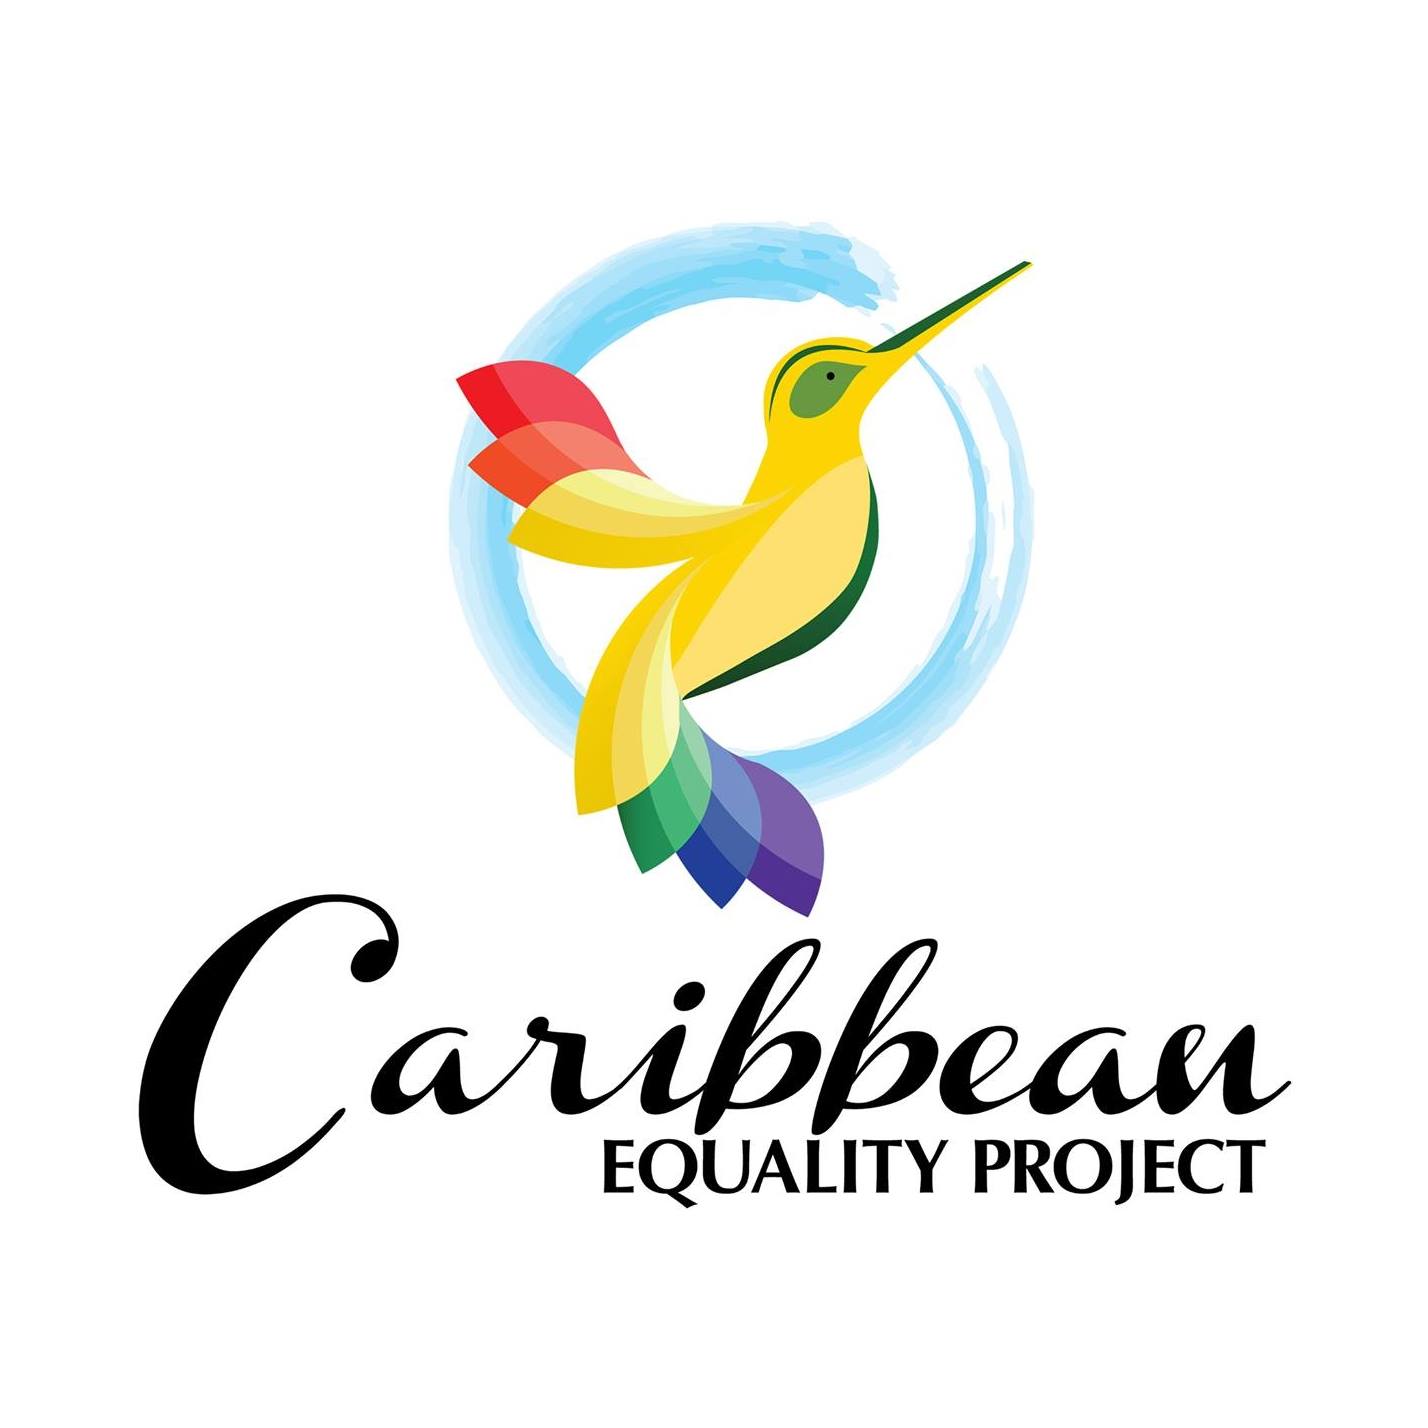 LGBTQ Human Rights Organization in New York - Caribbean Equality Project